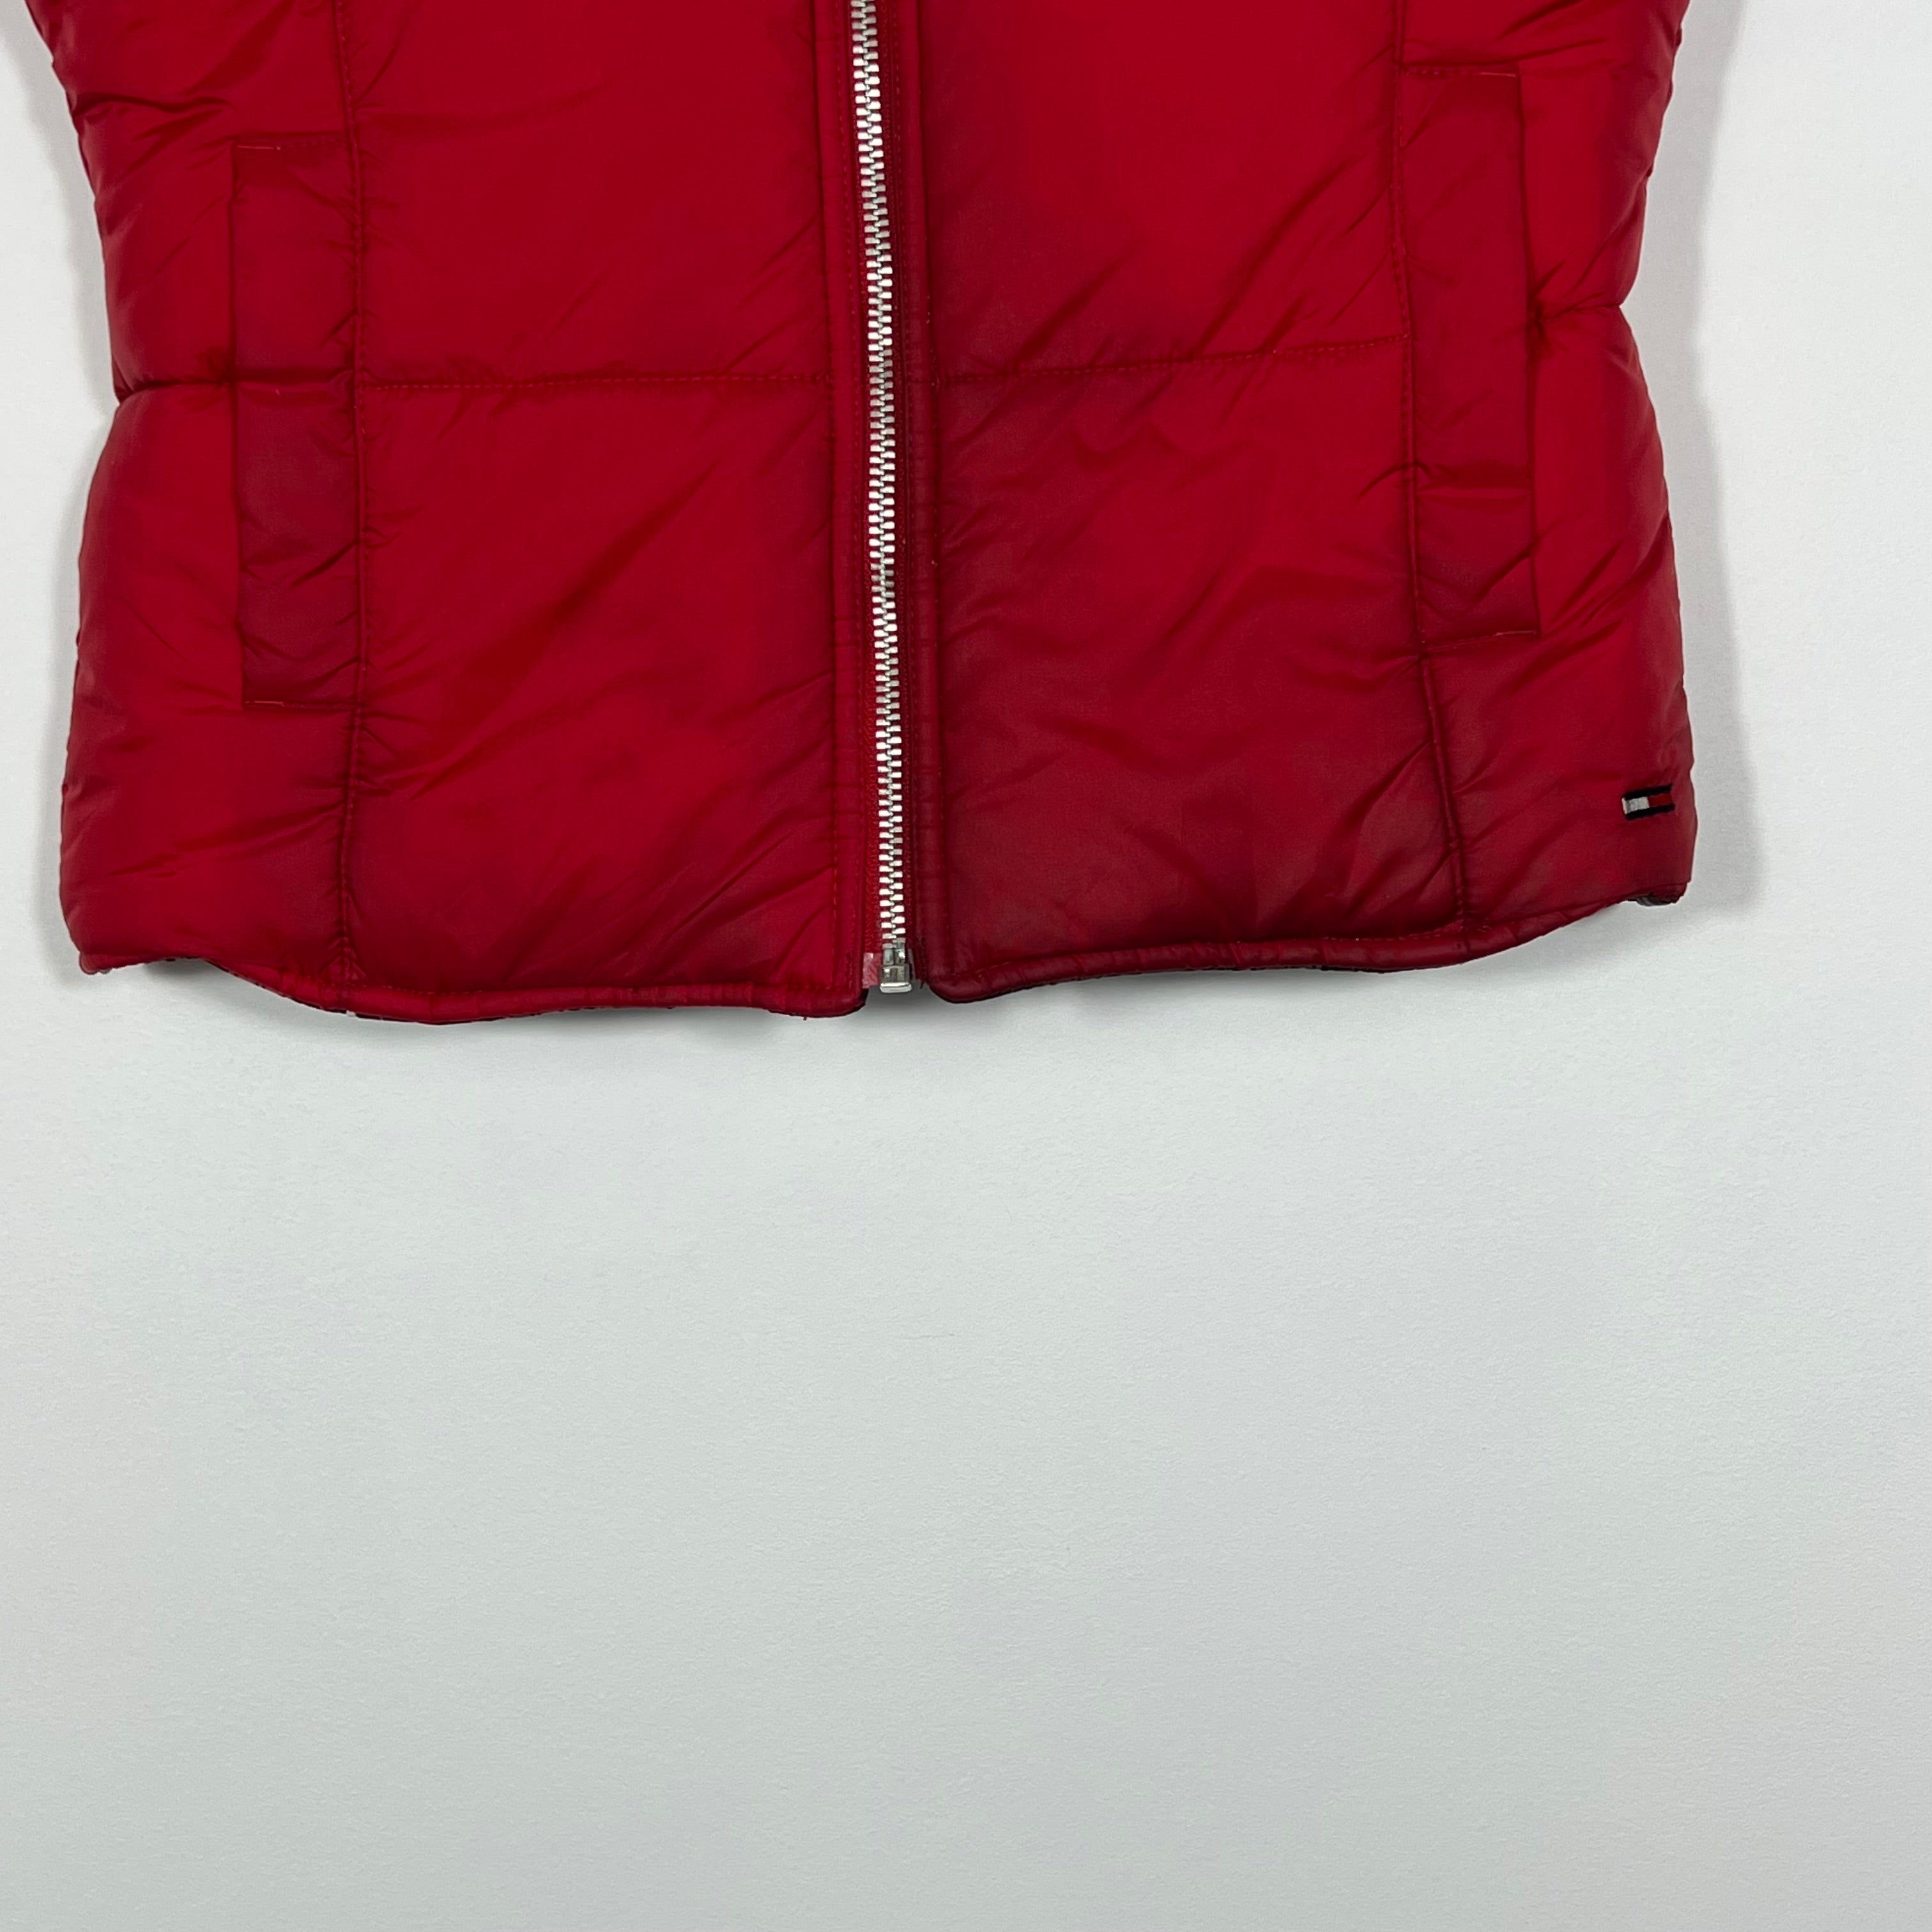 Tommy Hilfiger Reversible Insulated Vest - Women's XS